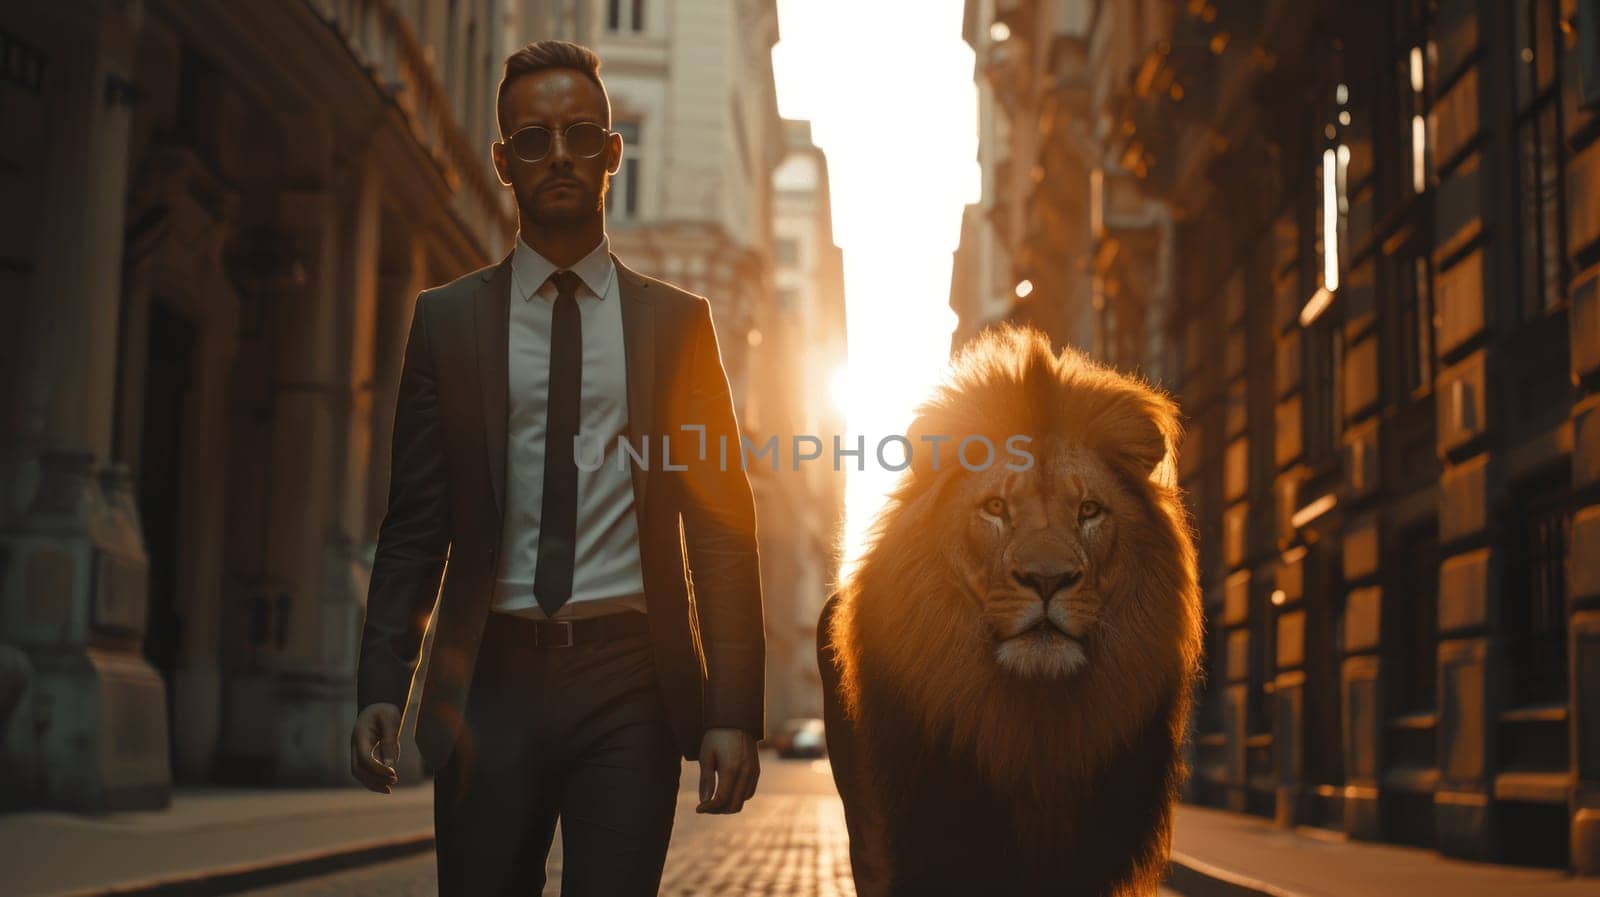 A business man is walking with a lion in the street by golfmerrymaker